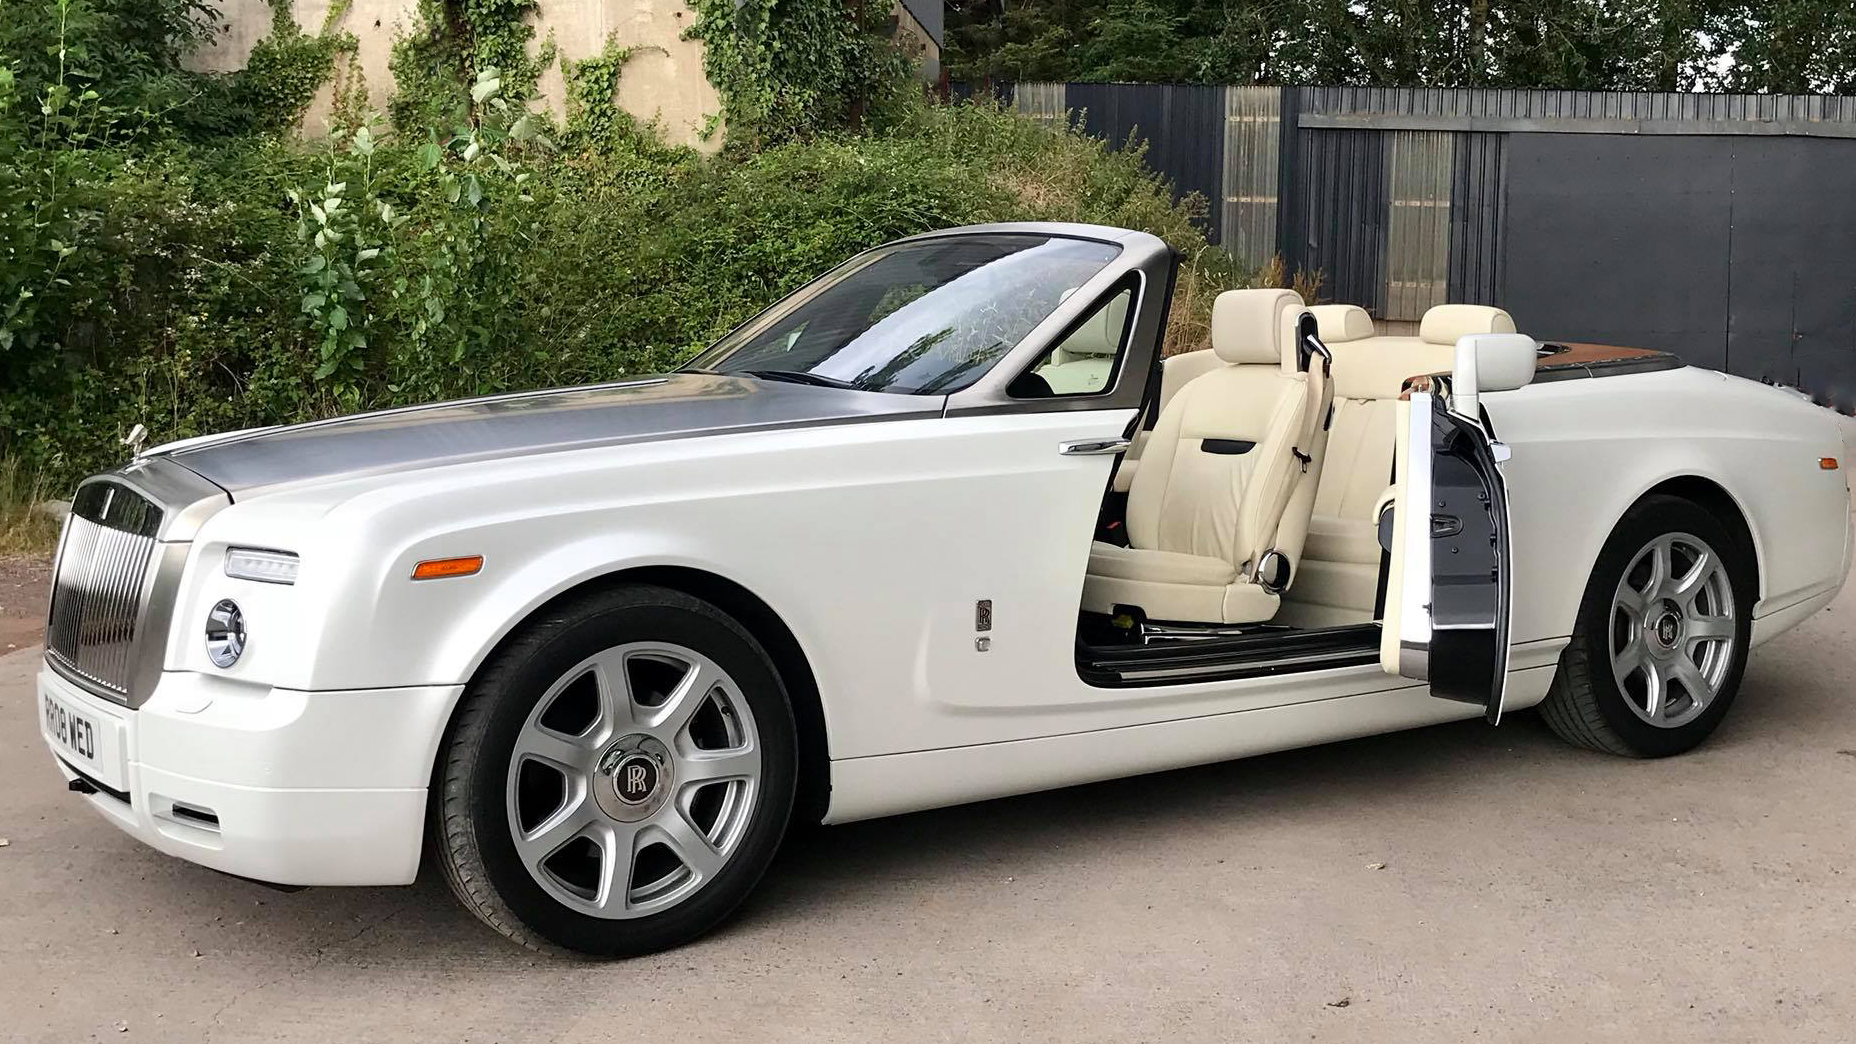 Used RollsRoyce Convertibles for Sale Near Me  Carscom